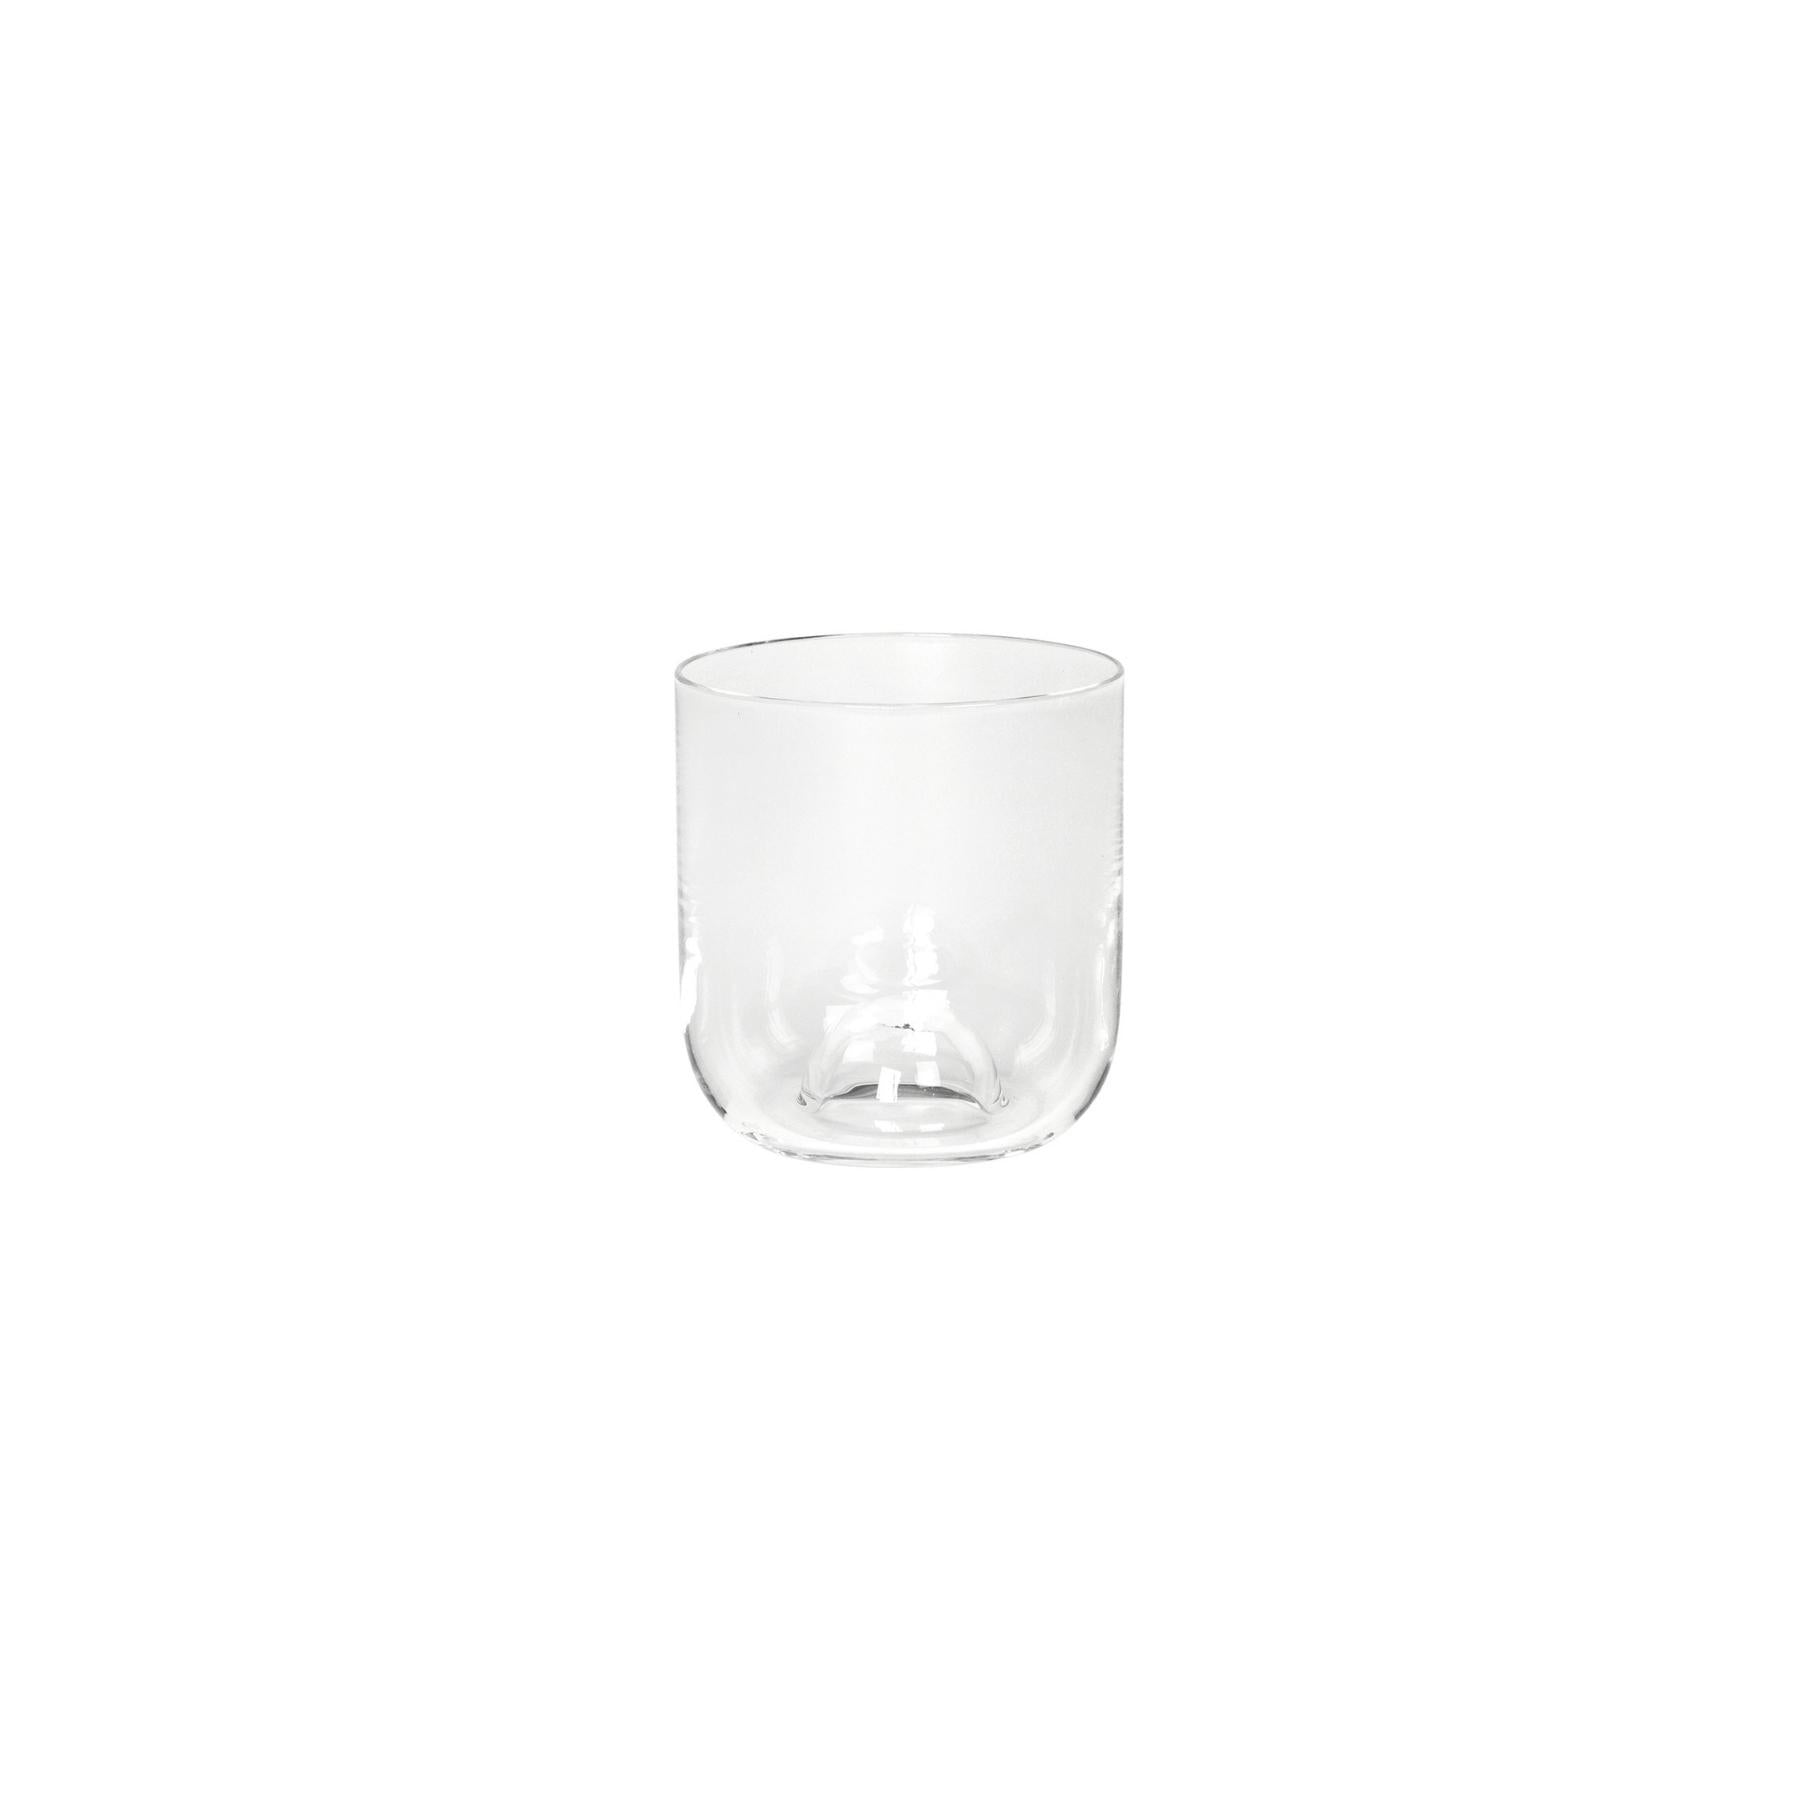 Capsule Drinking Glass - Small - Set of 4